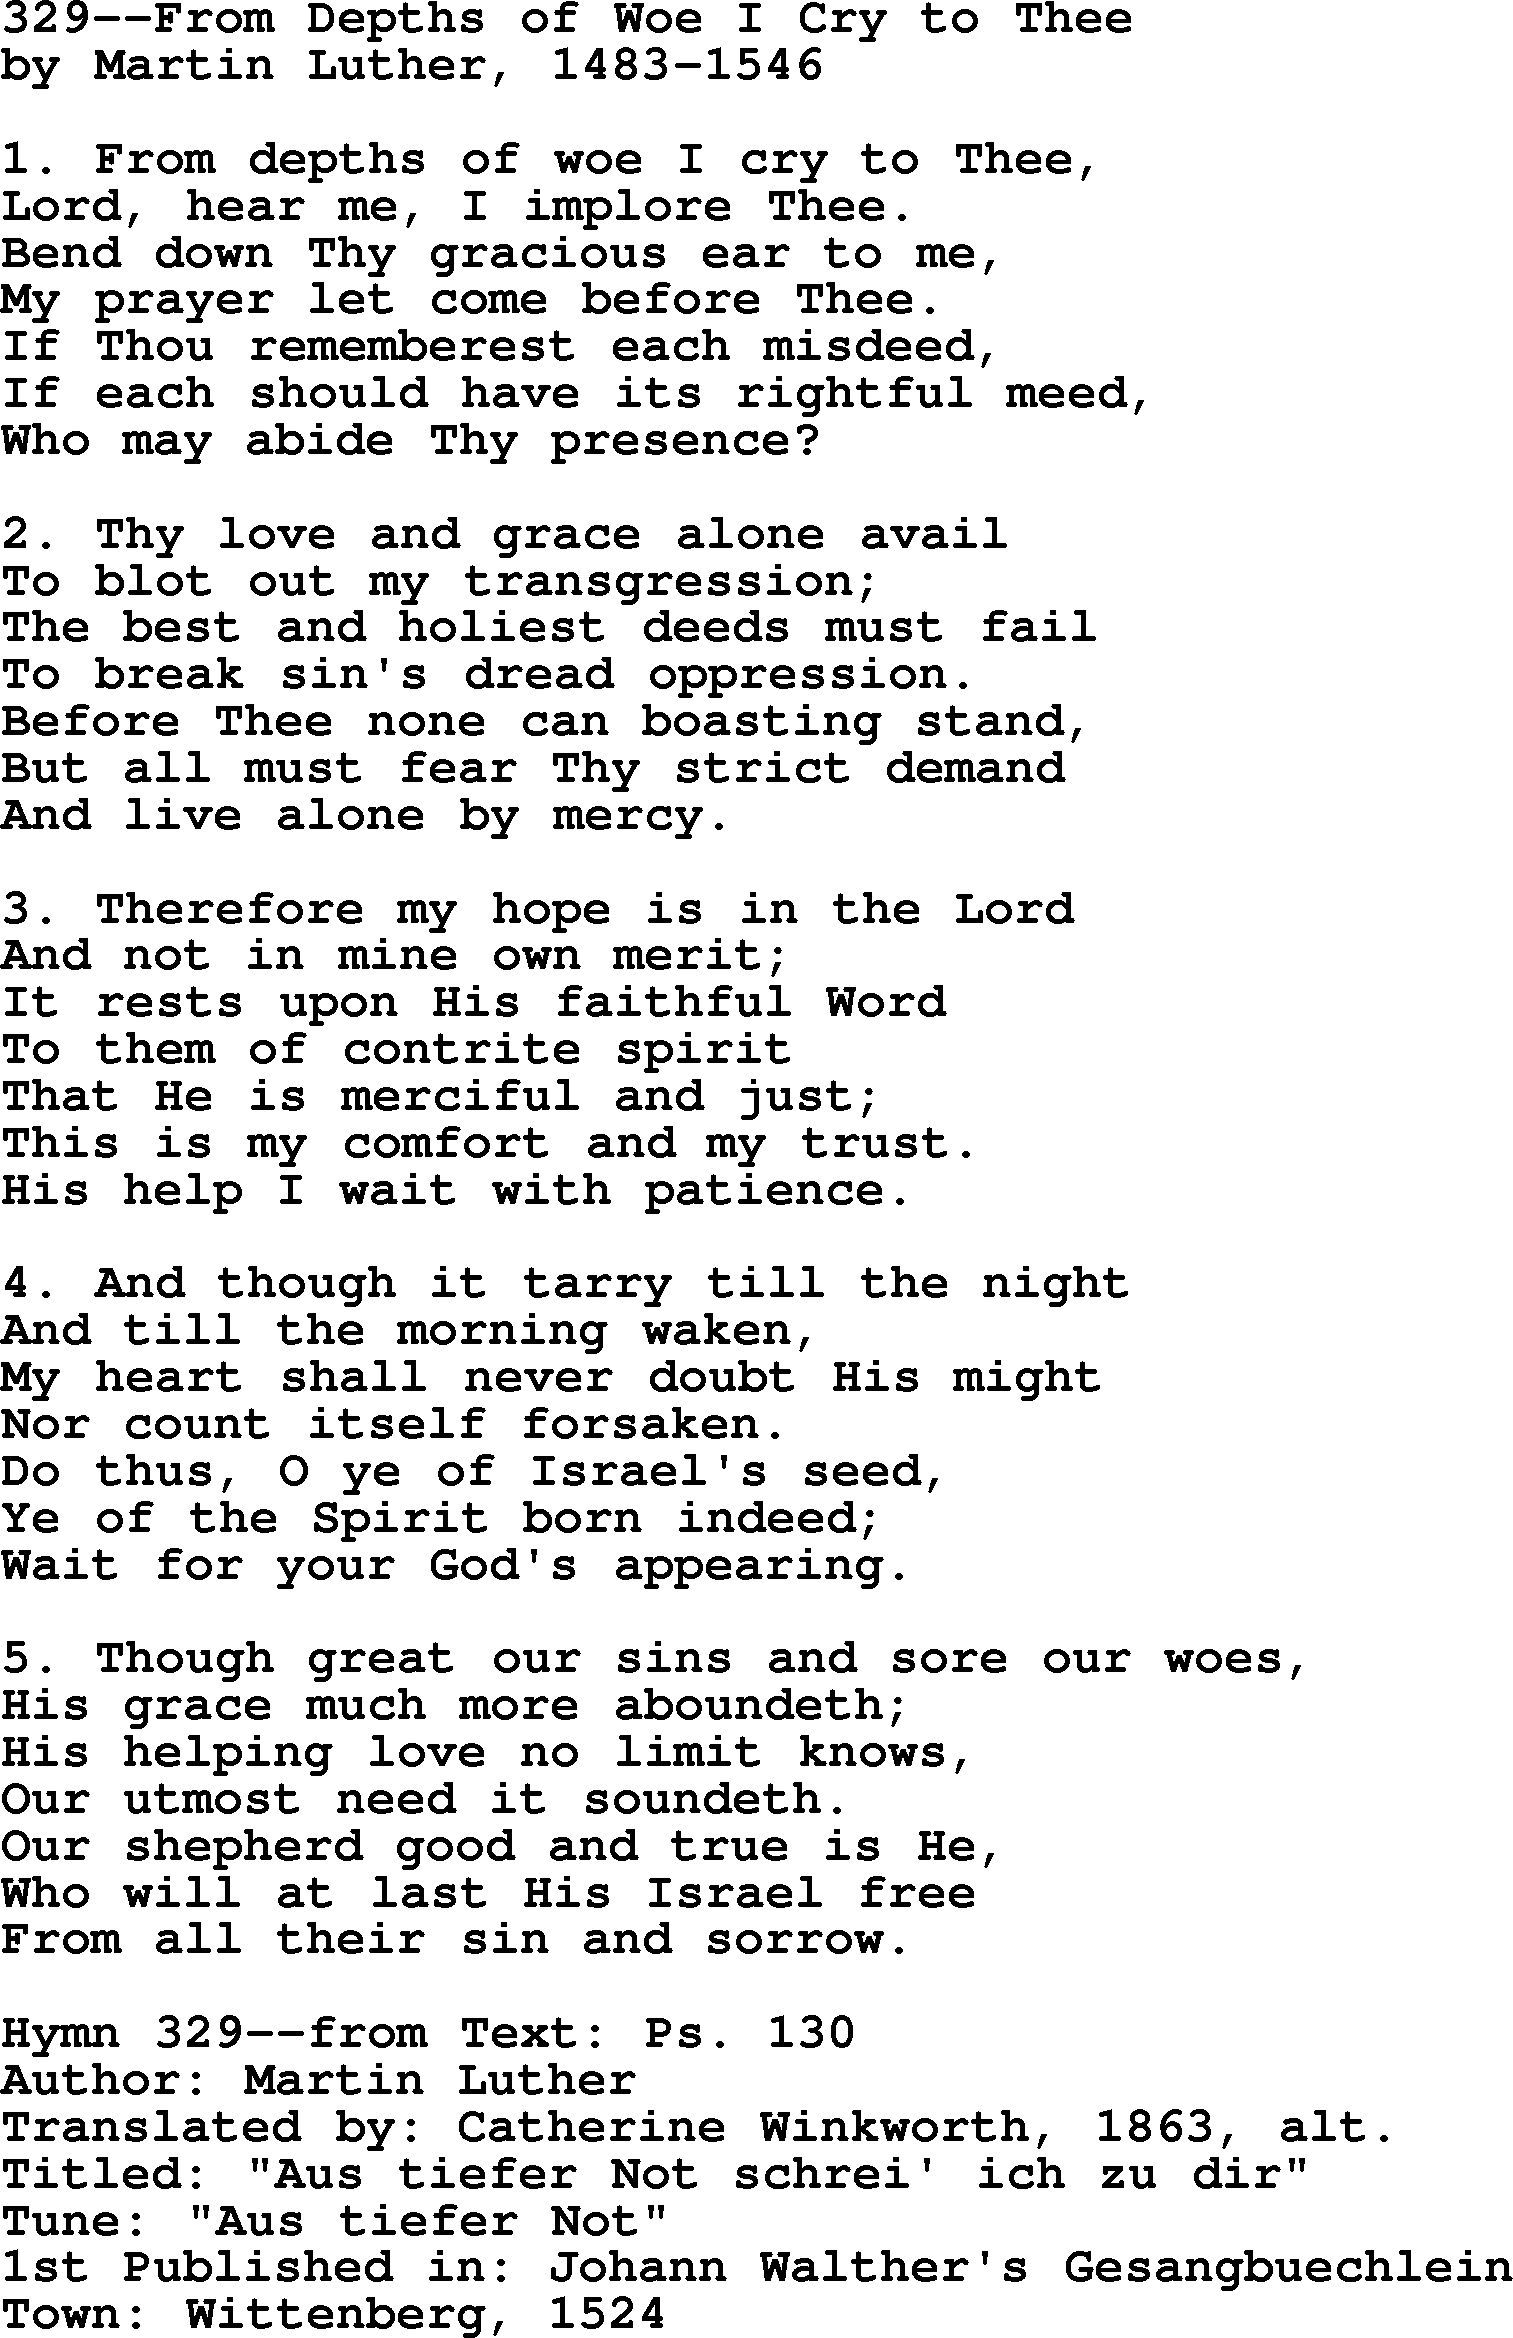 Lutheran Hymn: 329--From Depths of Woe I Cry to Thee.txt lyrics with PDF